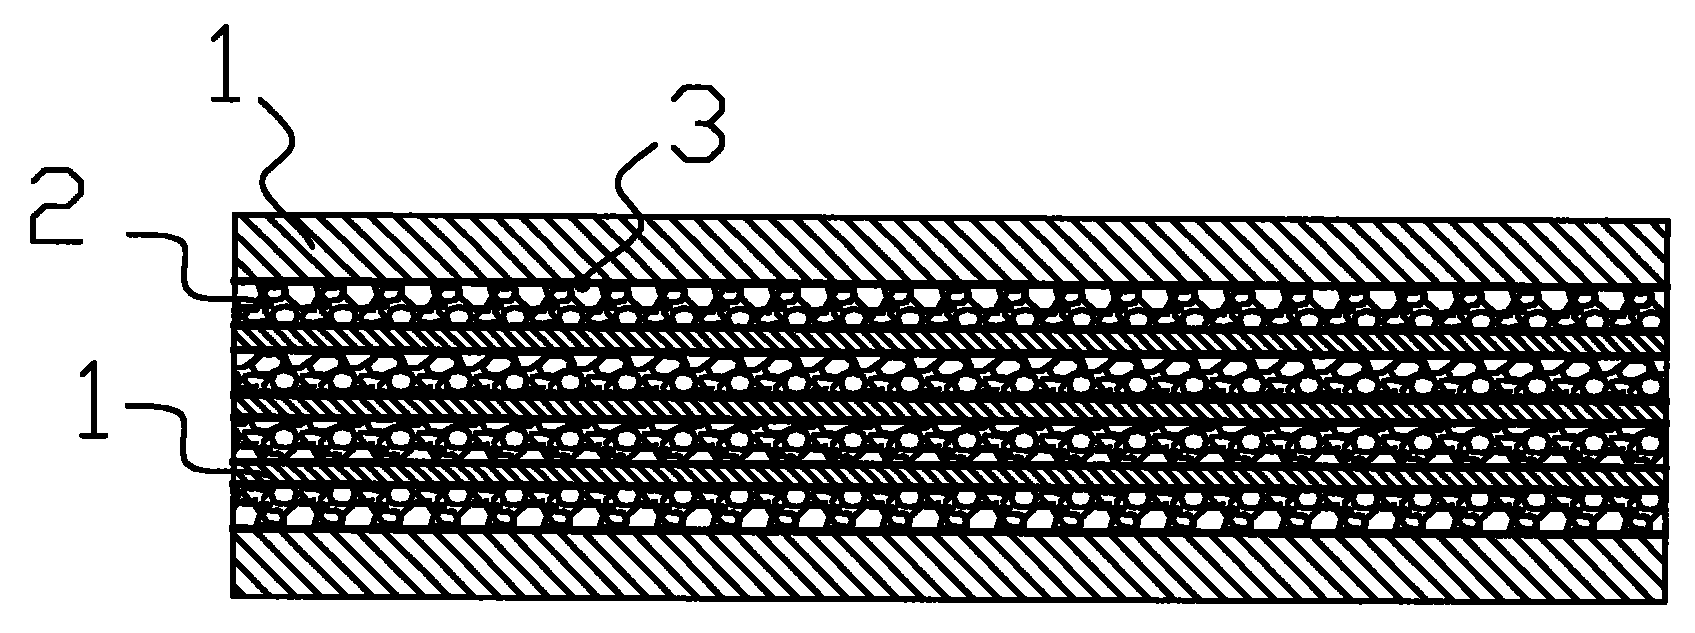 Multilayer perlite composite flame-retardant sheet and preparation method thereof